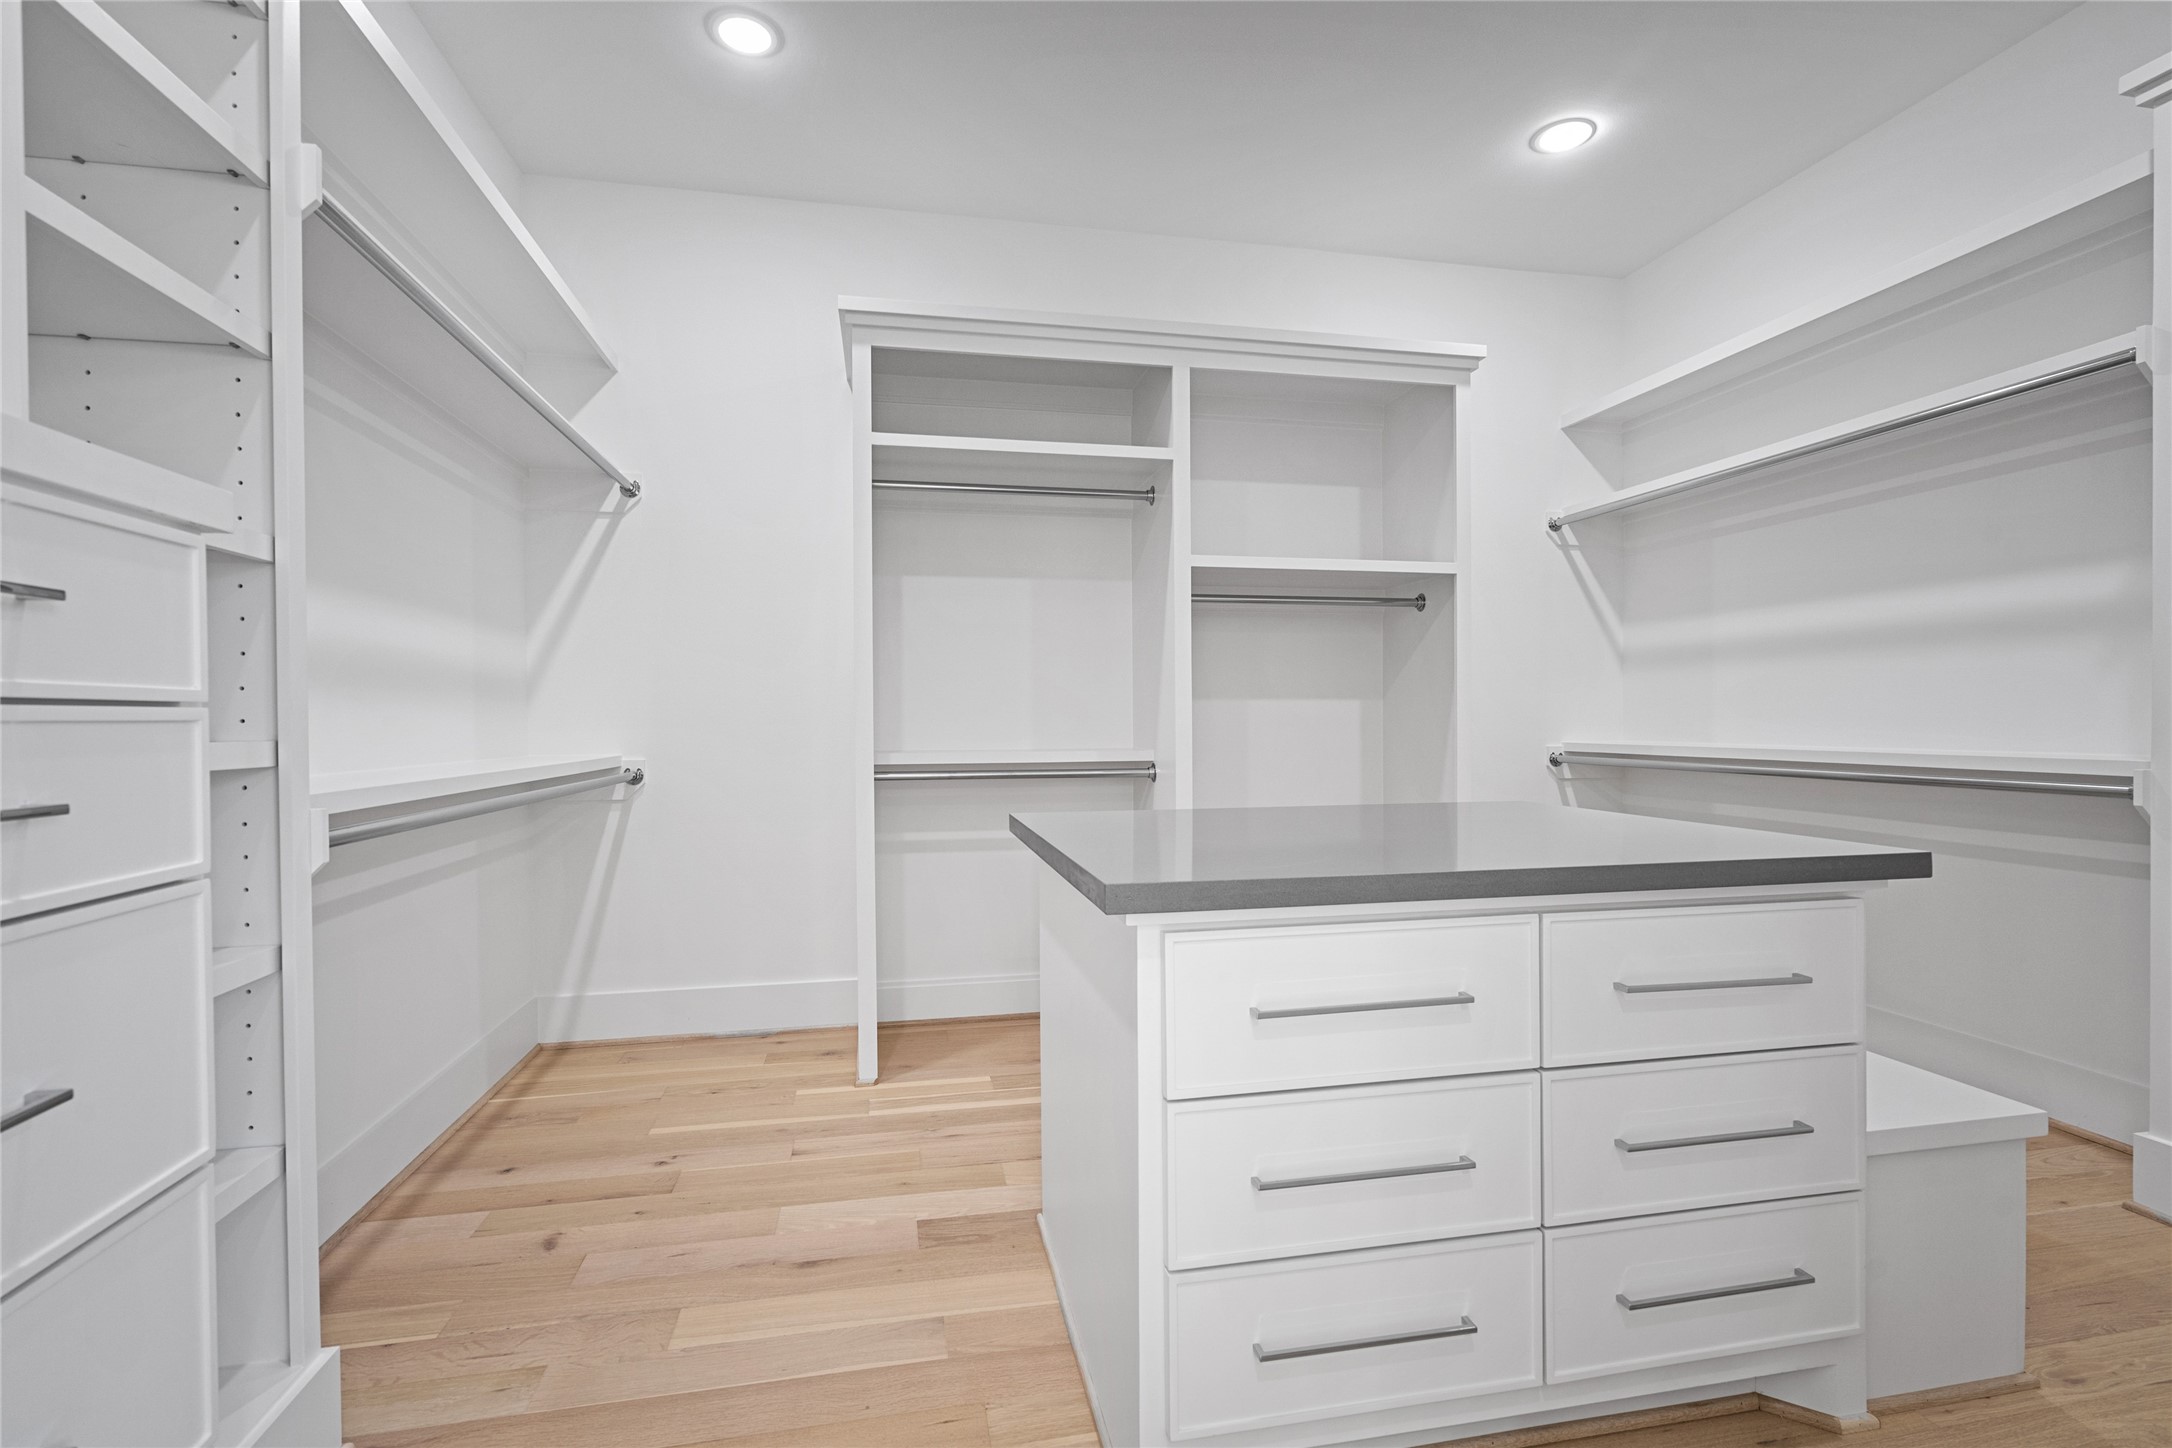 The primary closet includes tons of storage, creating space for longer garments, custom cabinetry and even a seat at the end of the island.